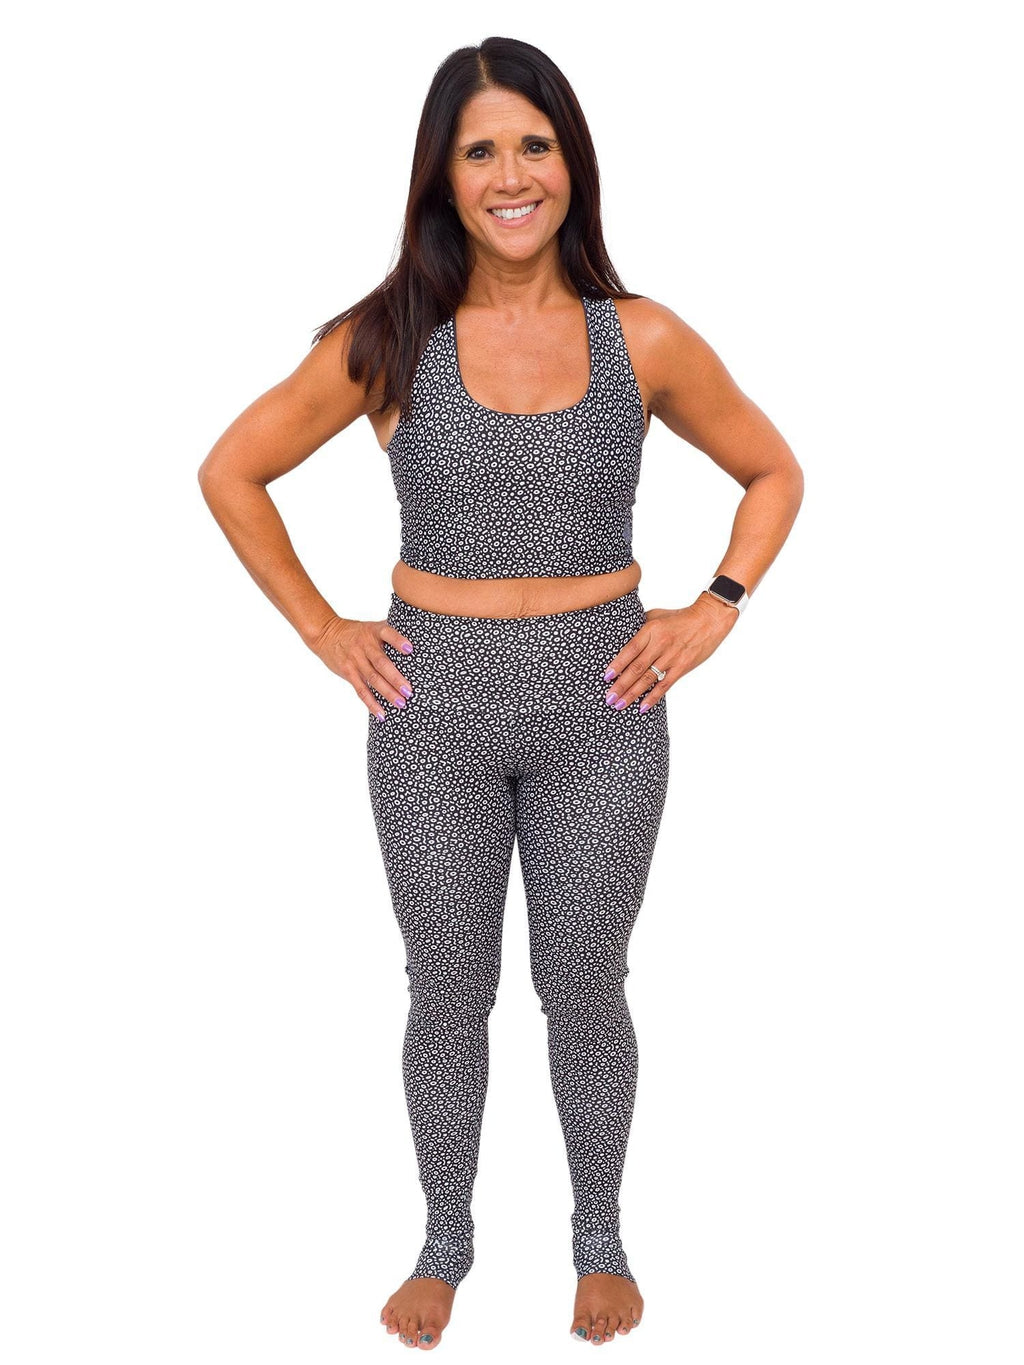 Model: Donna is a yoga teacher whose goal is to empower her students by using yoga to create deeper connections with themselves and with nature. She is 5&#39;2&quot;, 125 lbs, 34B and is wearing a S top and legging.